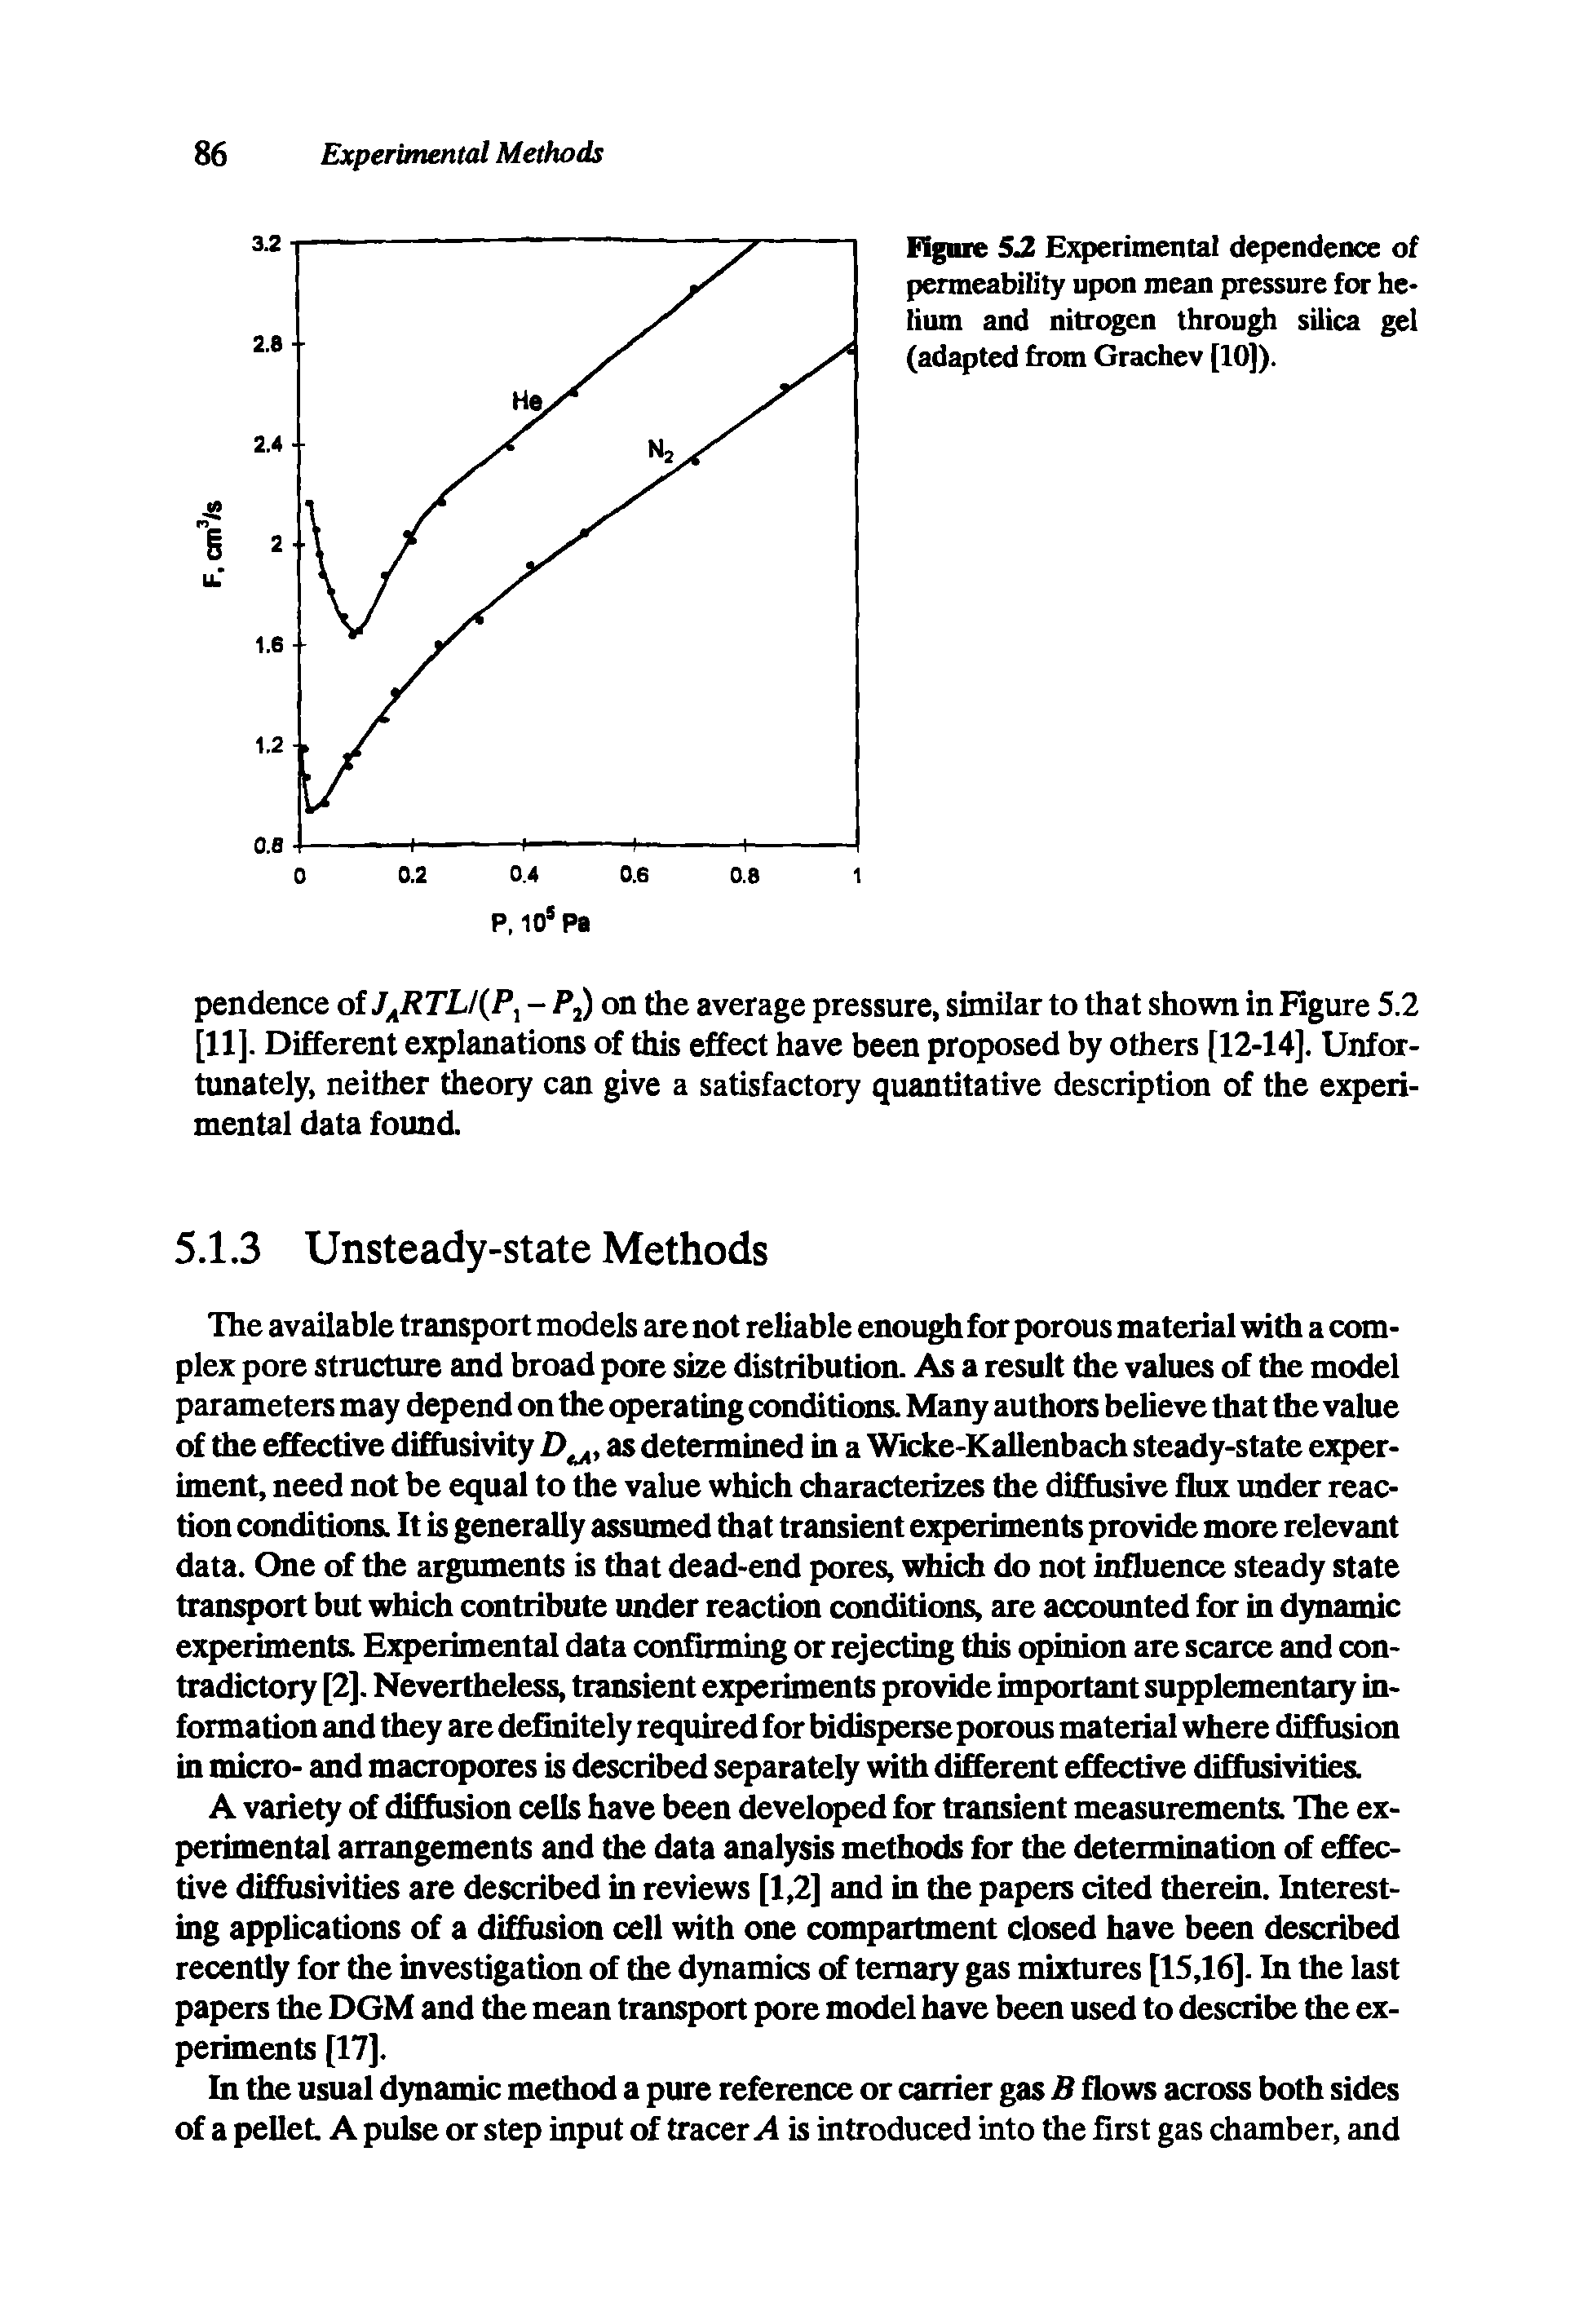 Figure 5.2 Experimental dependence of permeability upon mean pressure for helium and nitrogen through silica gel (adapted from Grachev [10]).